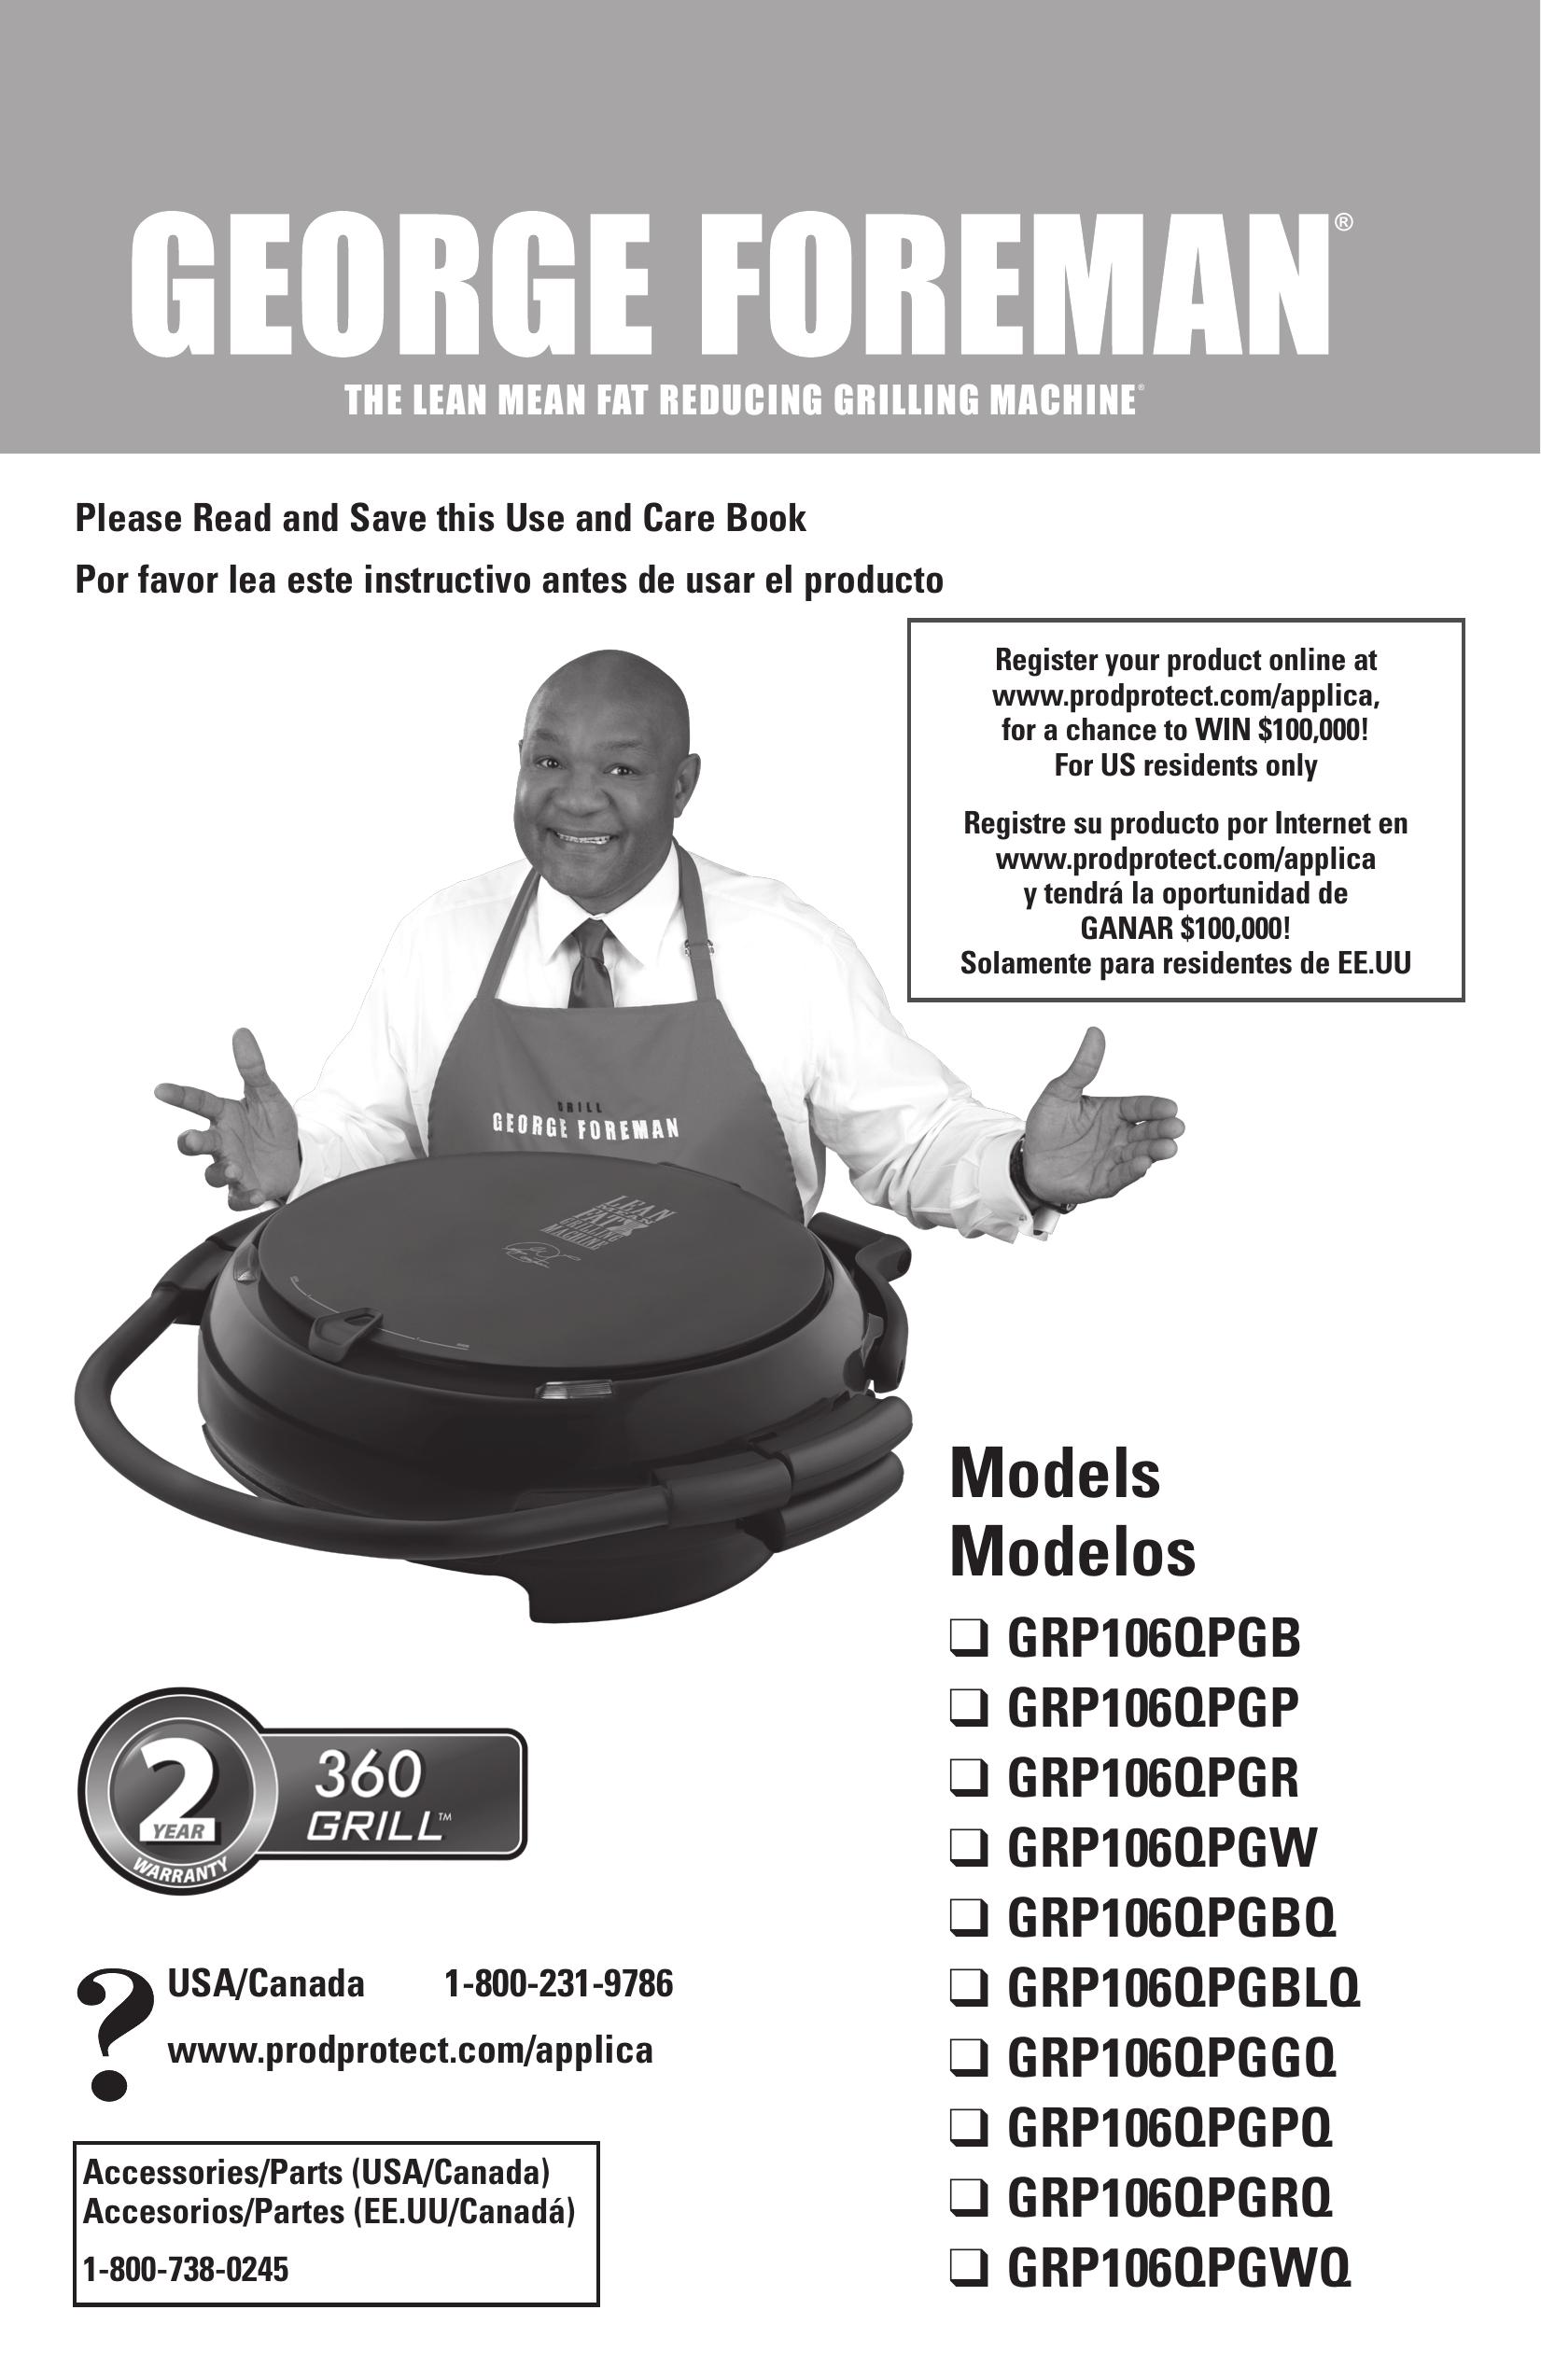 George Foreman GRP106QPGGQ Electric Grill User Manual